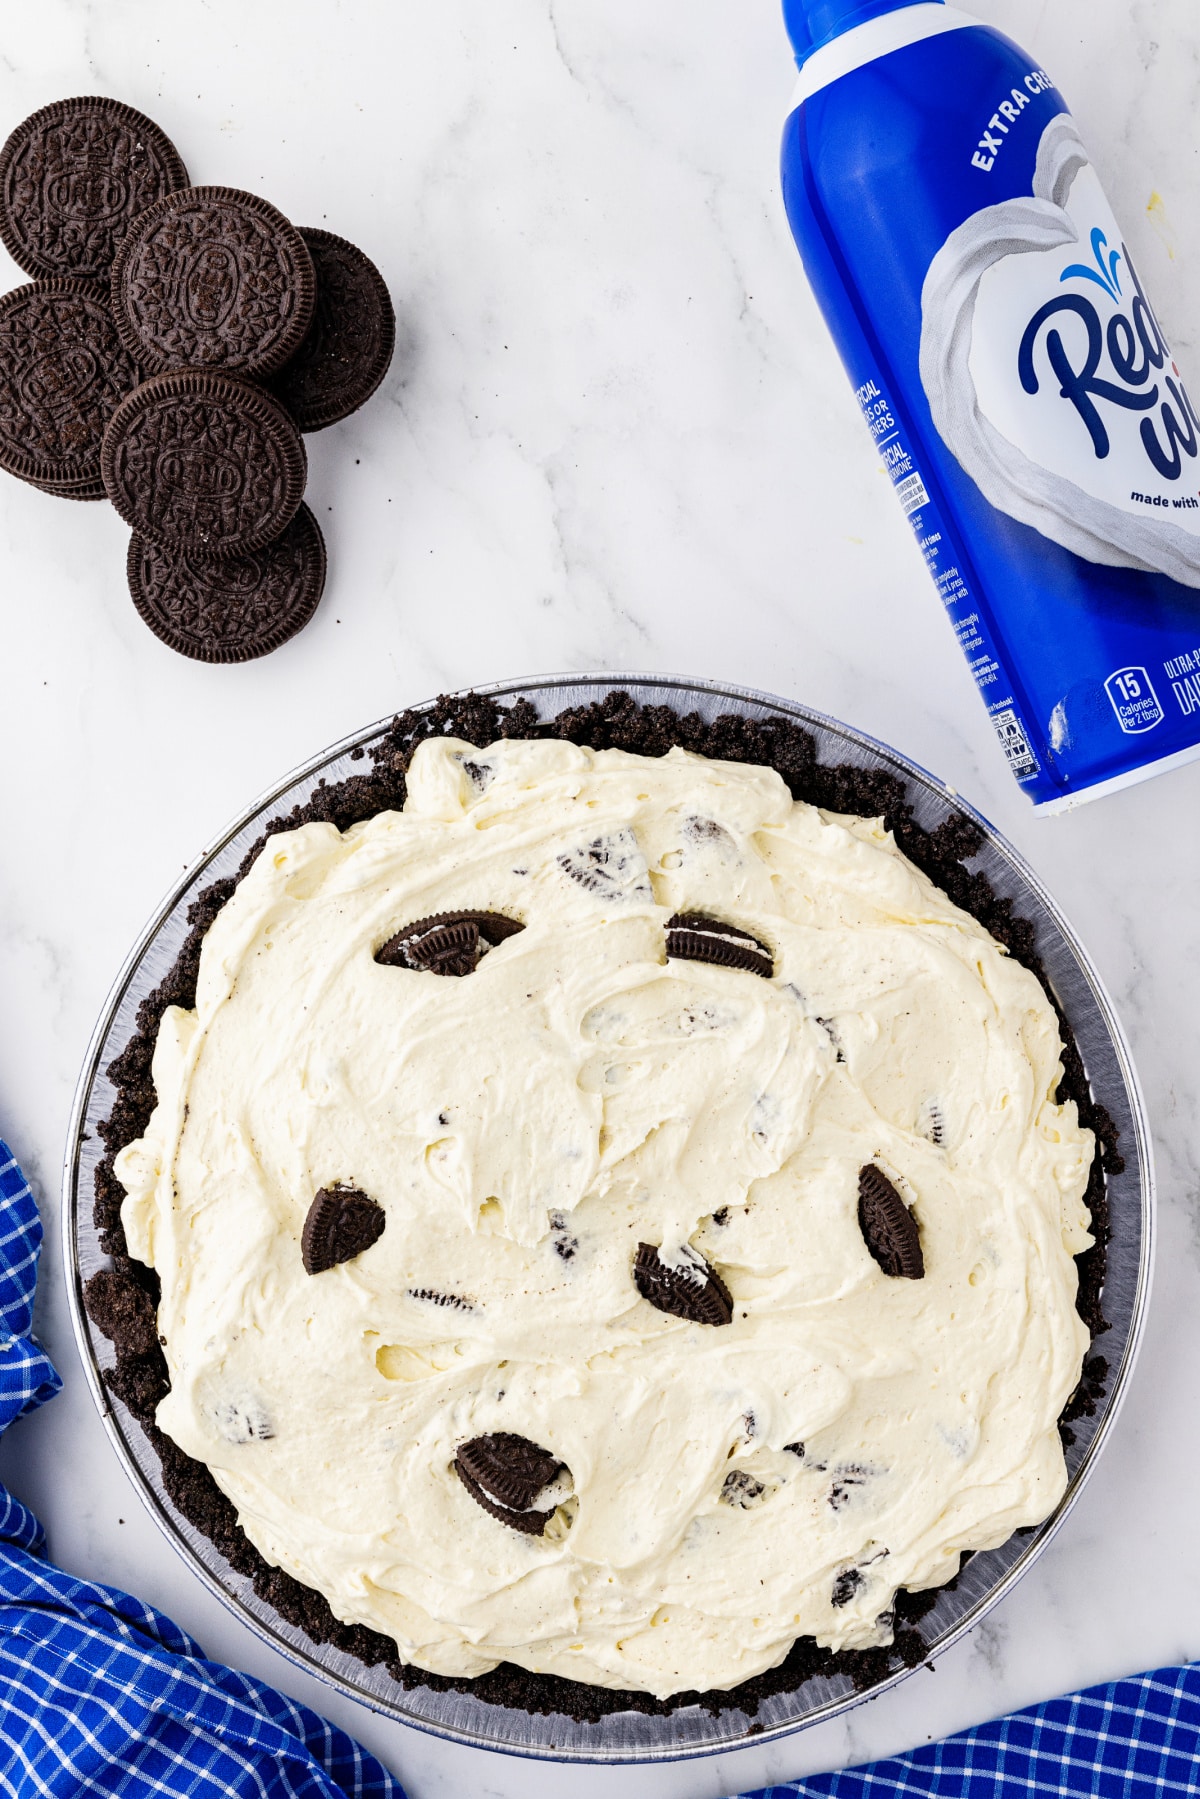 Oreo pie crust filled with filling and topped with Oreo cookies and Whipped Cream